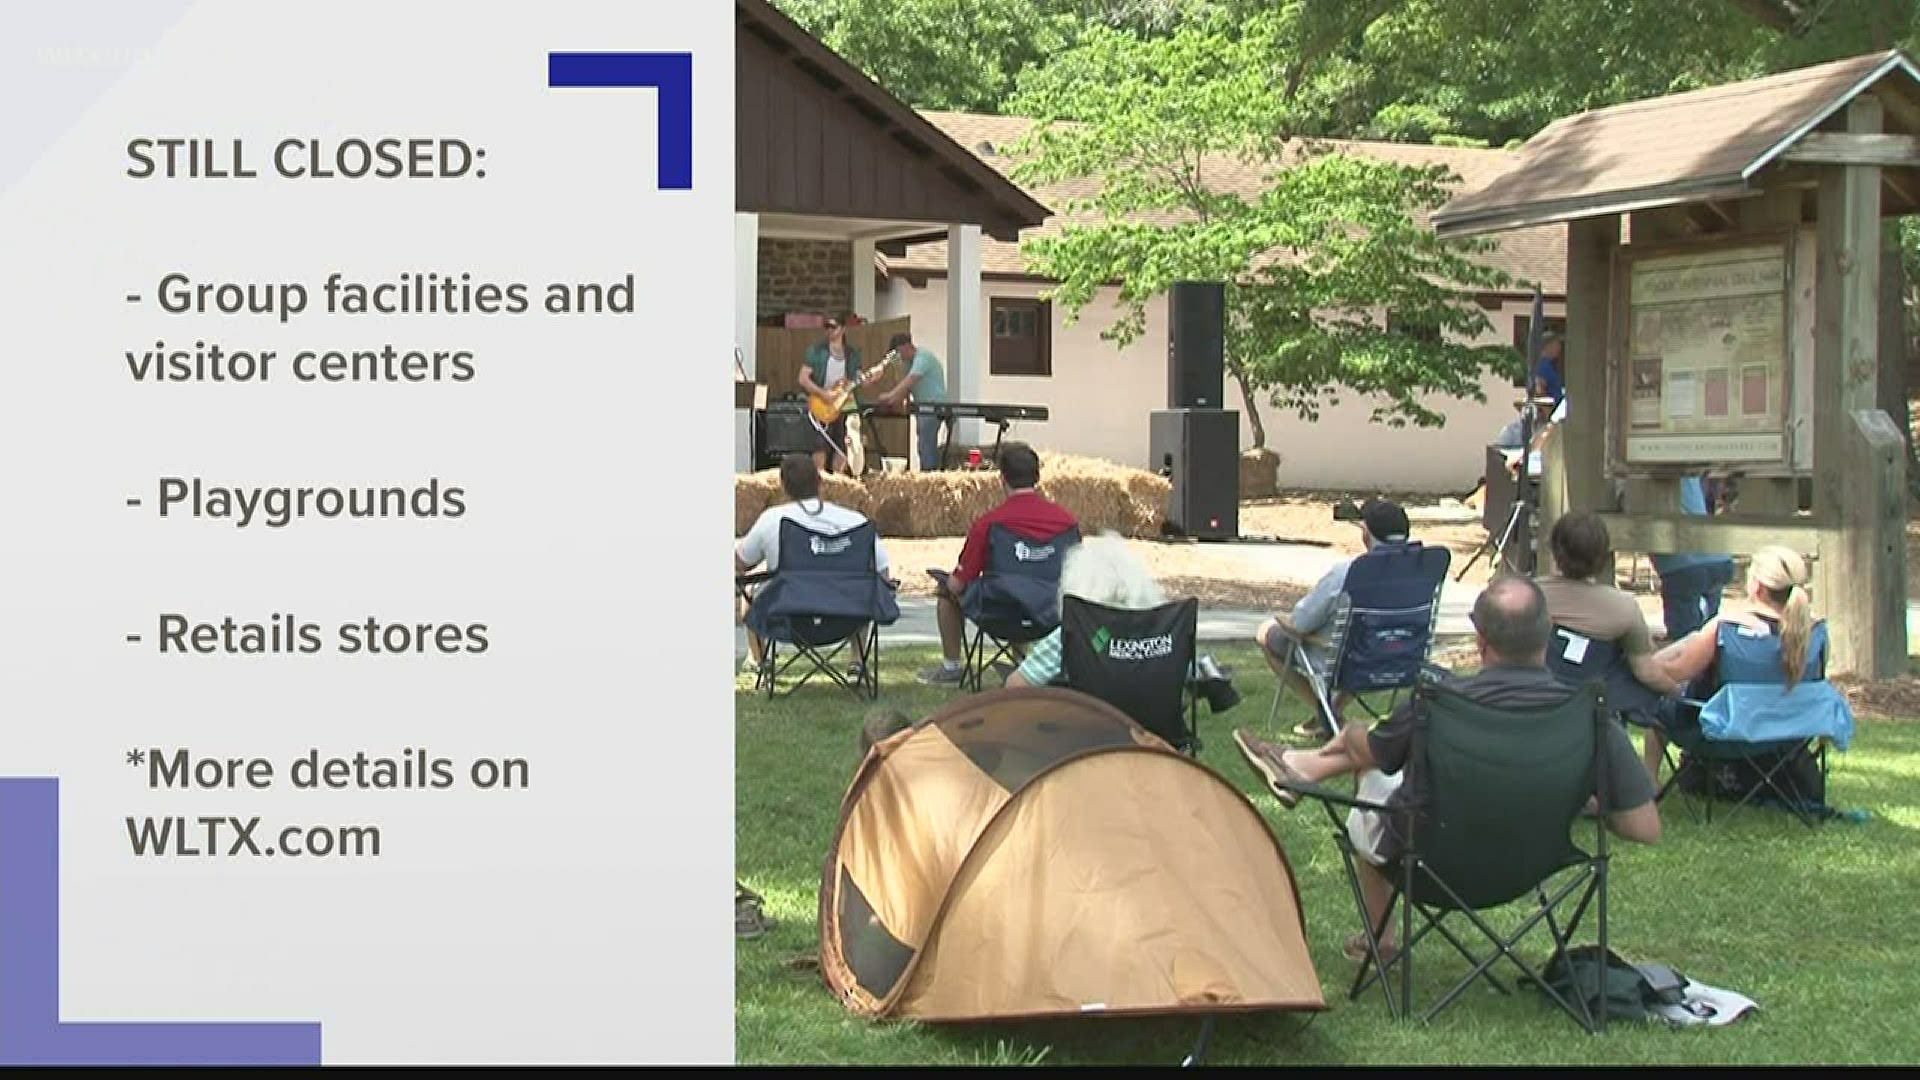 State parks will be back open starting this weekend, but there will be some limitations on what you can do there.